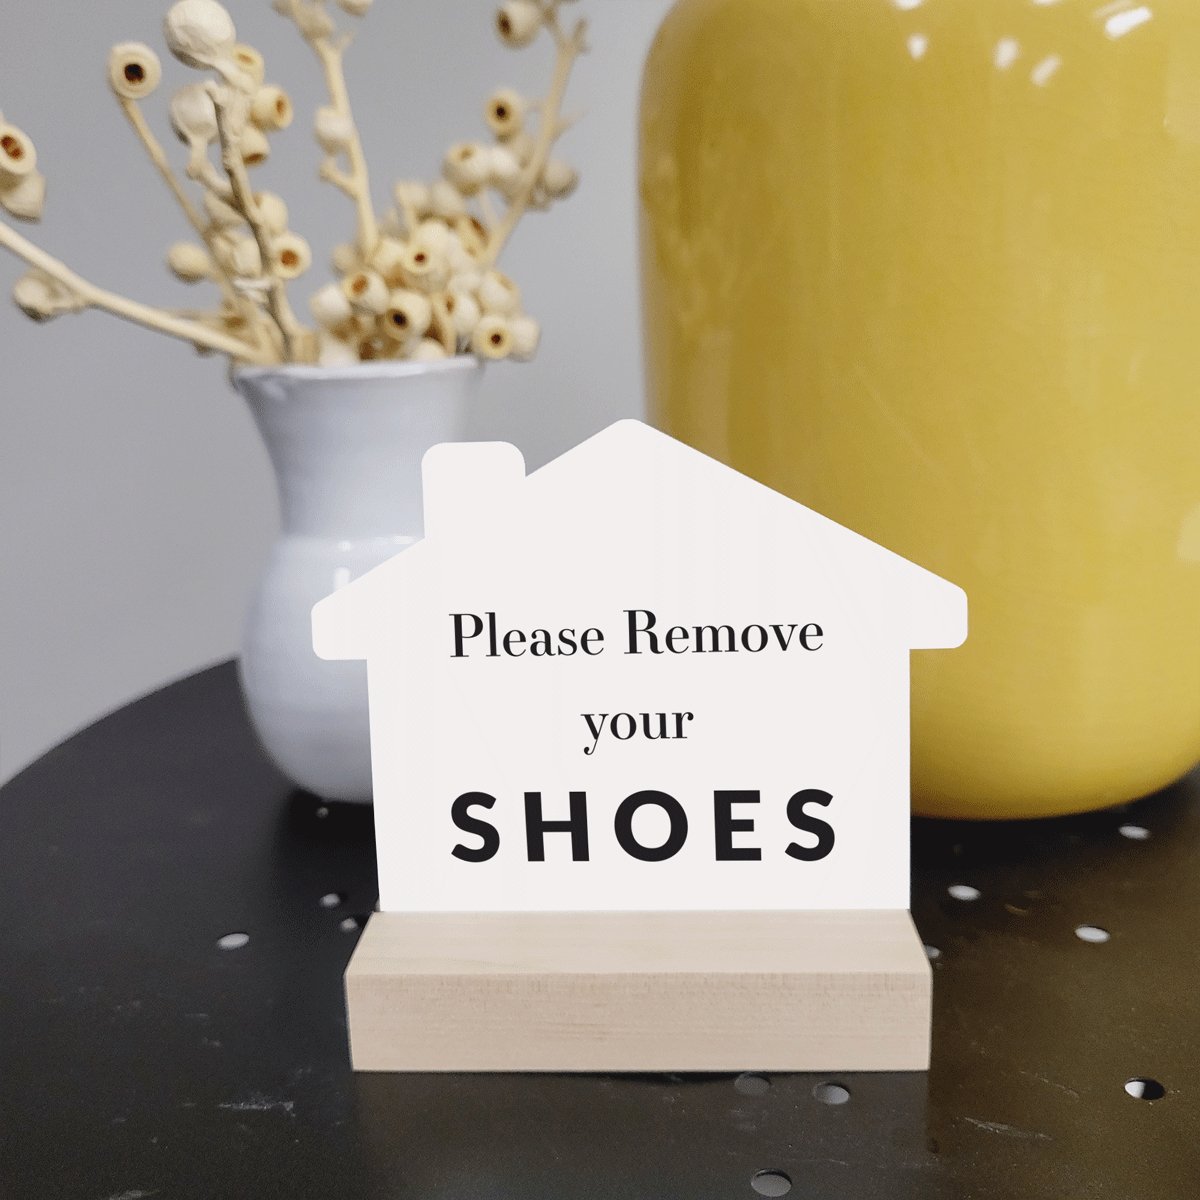 4x4 House - Please Remove Your Shoes - All Things Real Estate